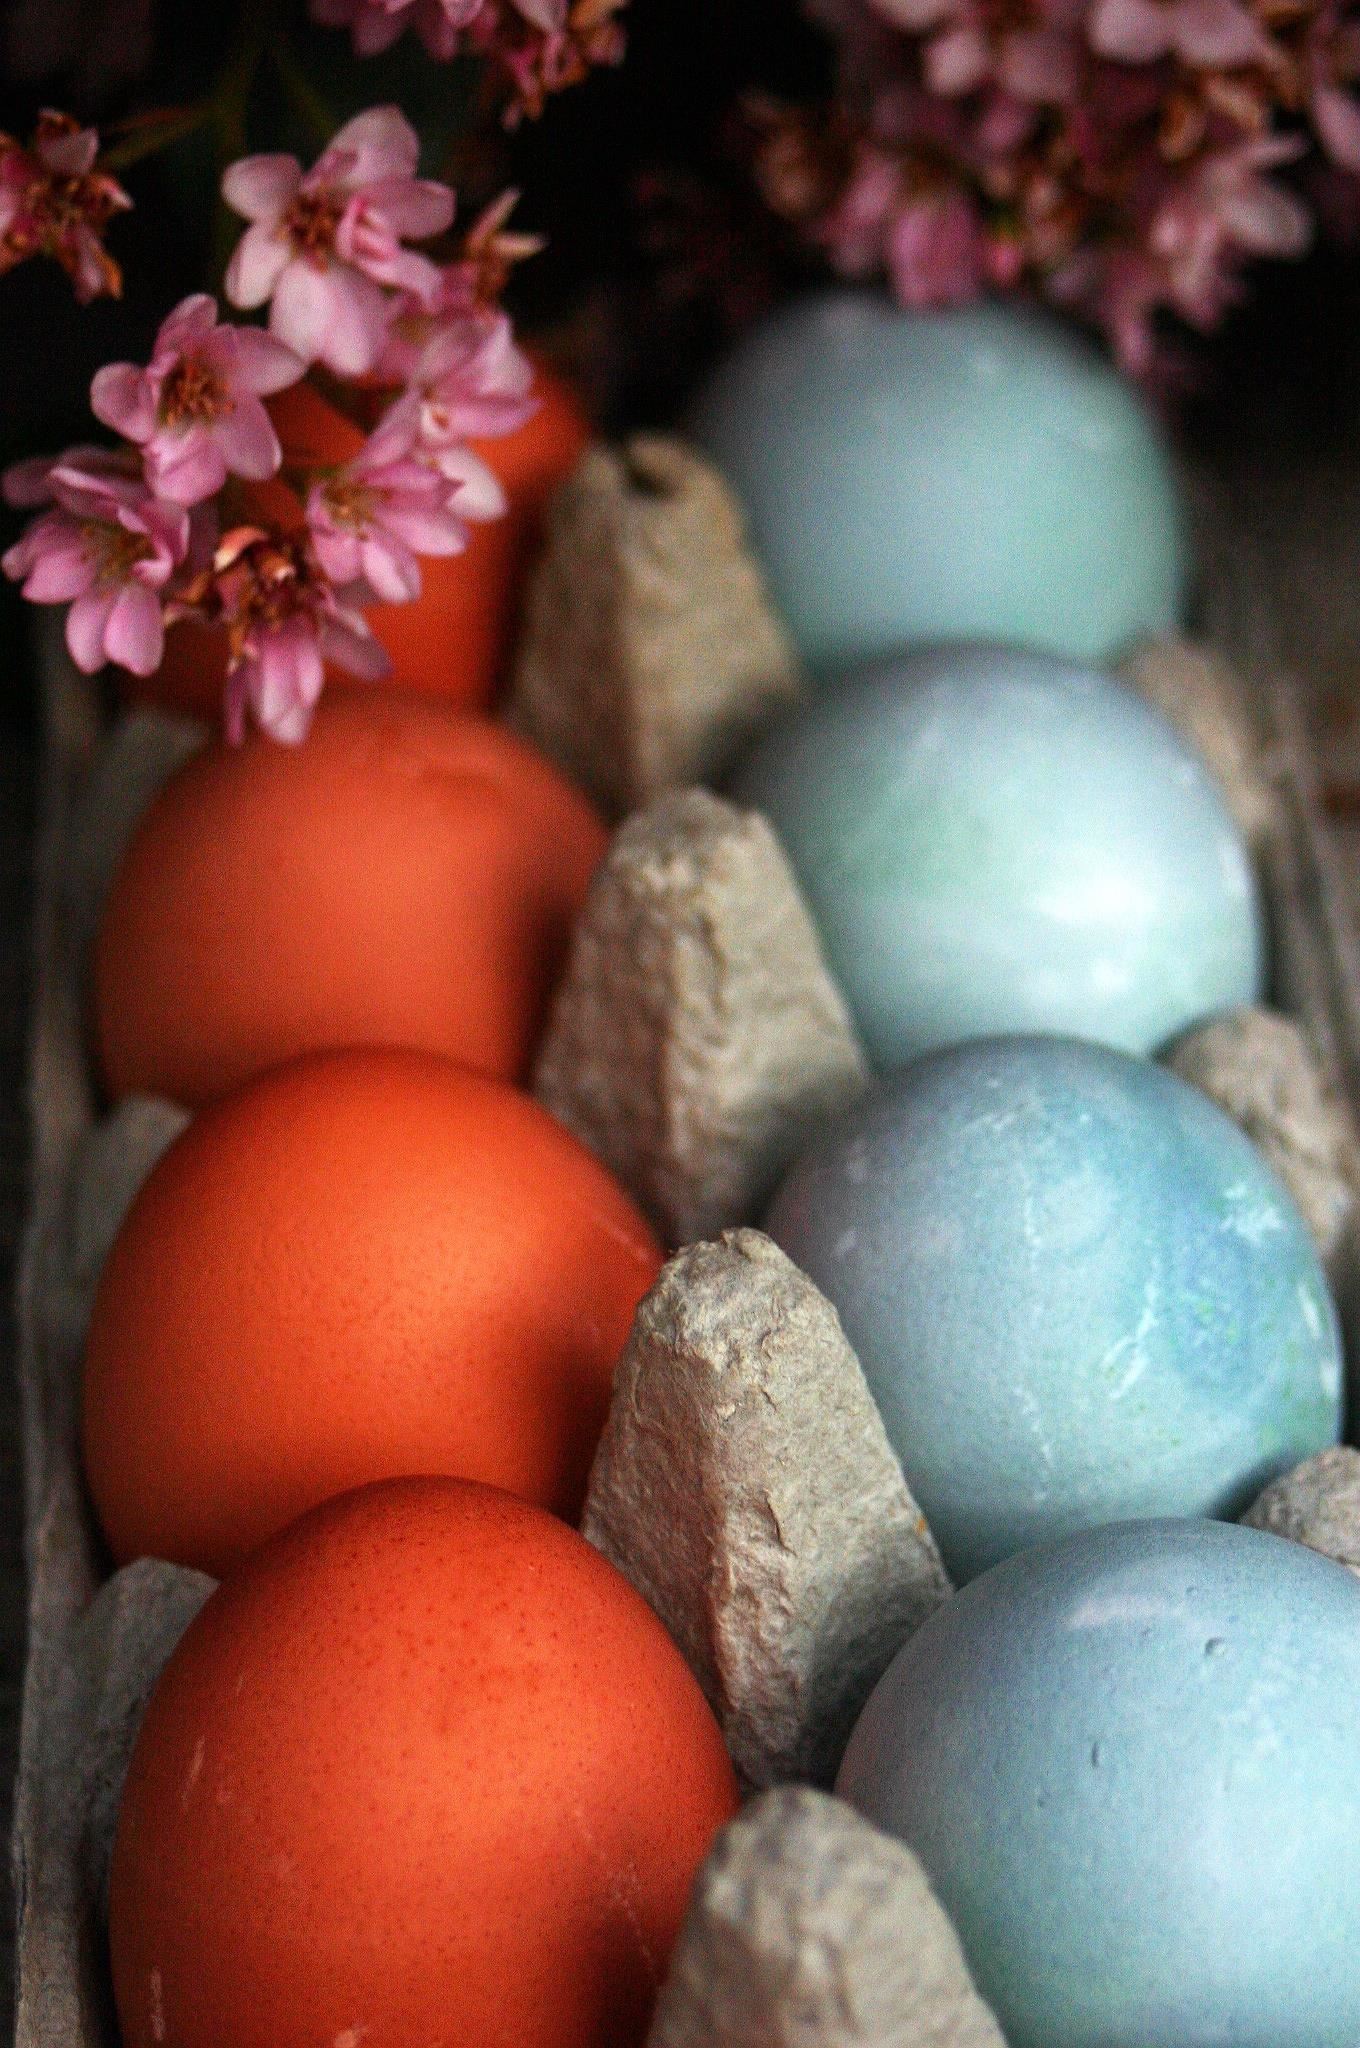 How to Color Easter Eggs with Veggies & Herbs Instead of Store-Bought Dyes